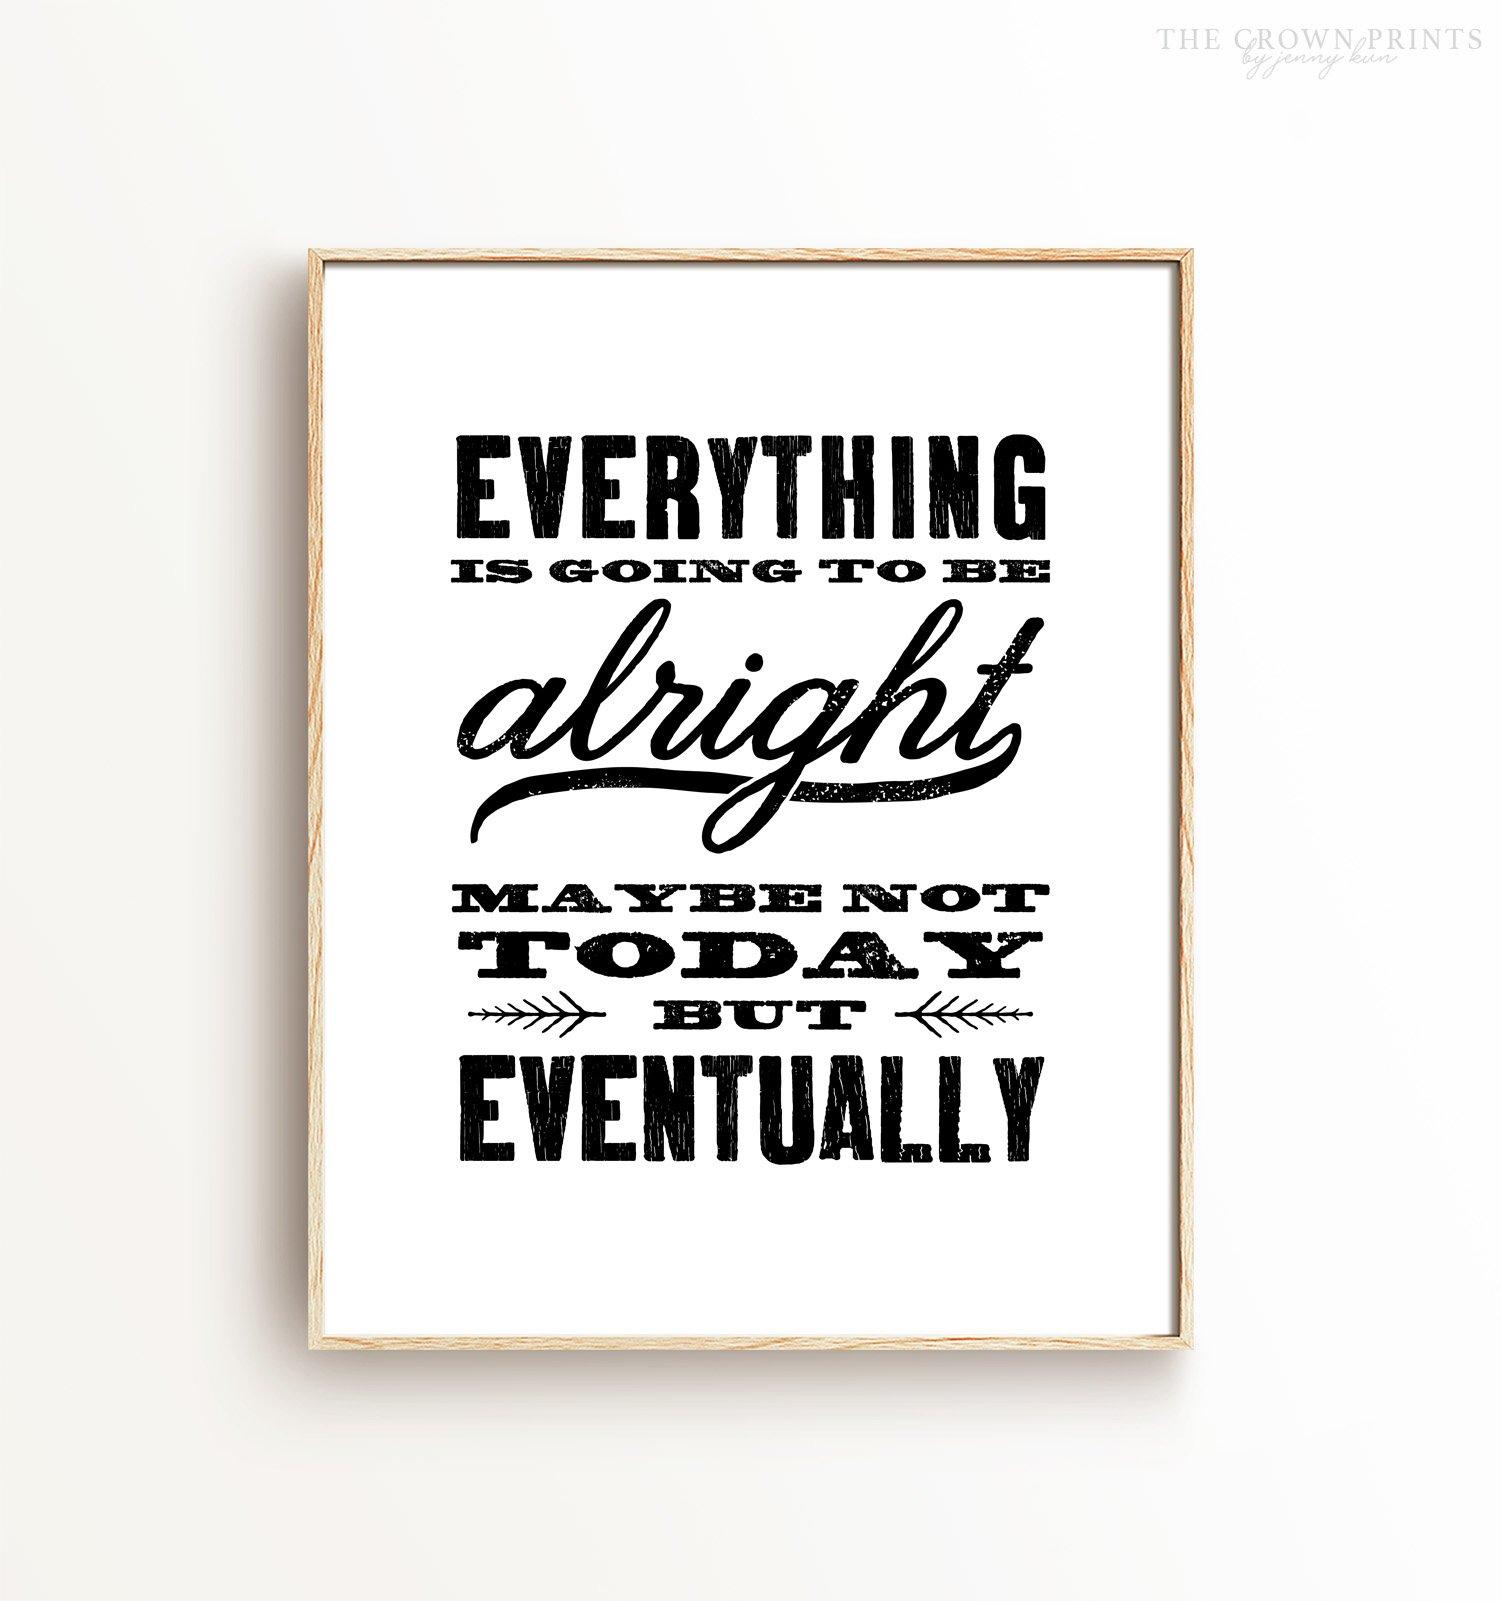 Everything is going to be alright not today, but eventually Printable Art